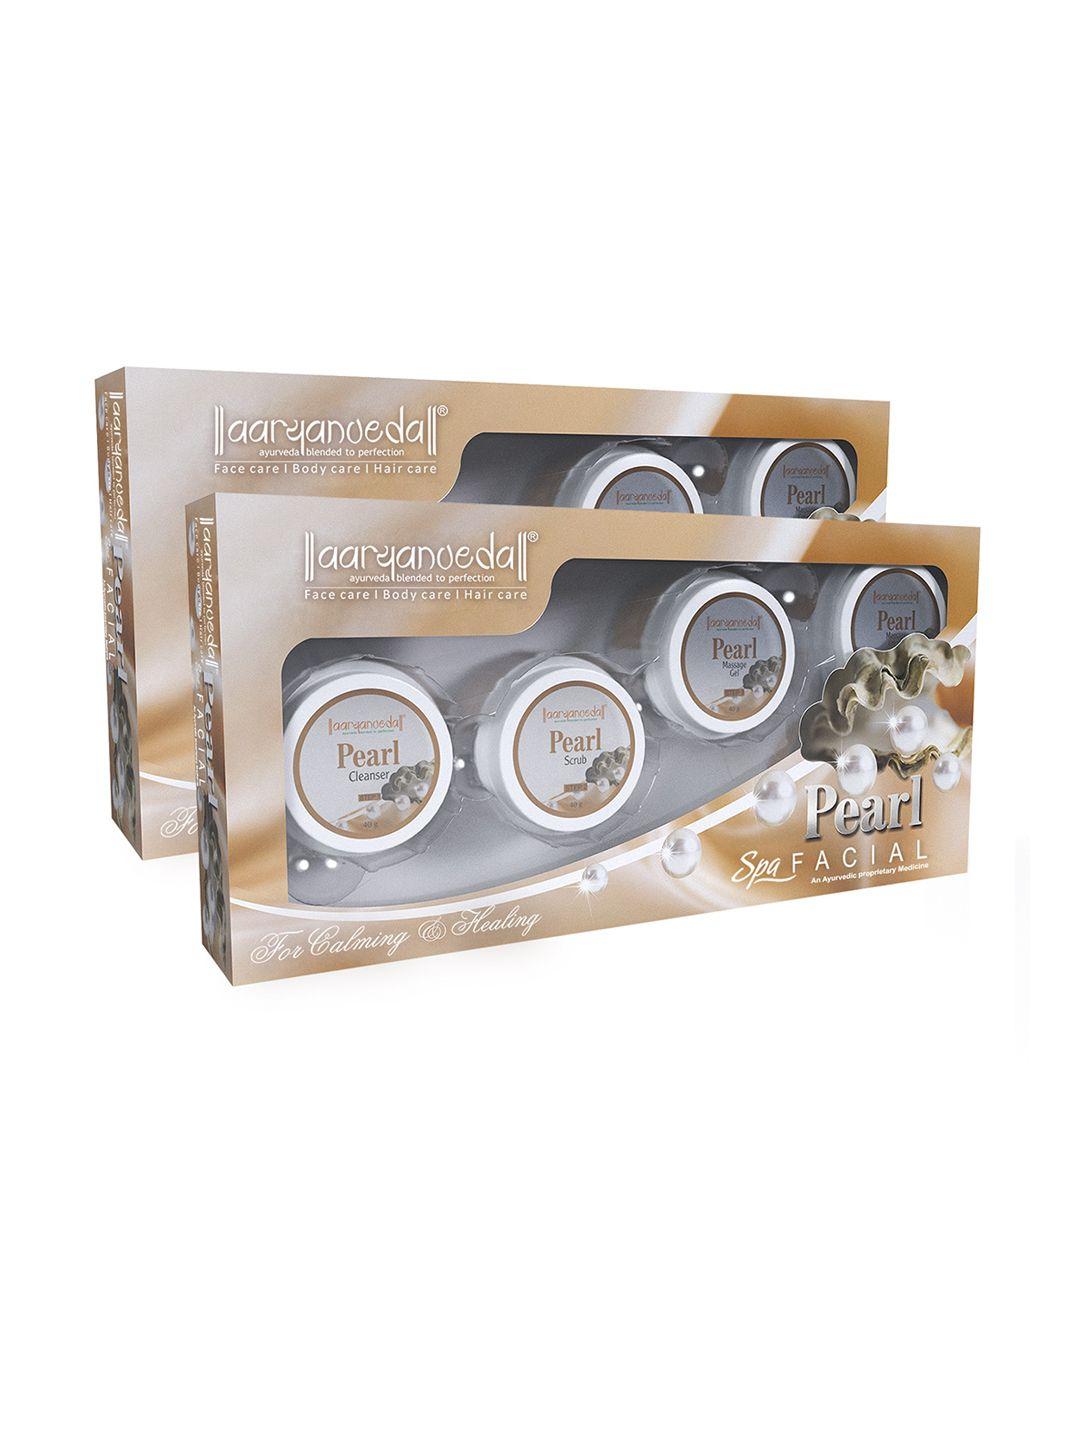 aryanveda set of 2 pearl facial kit with walnut extract to improves skin complexion -210 g